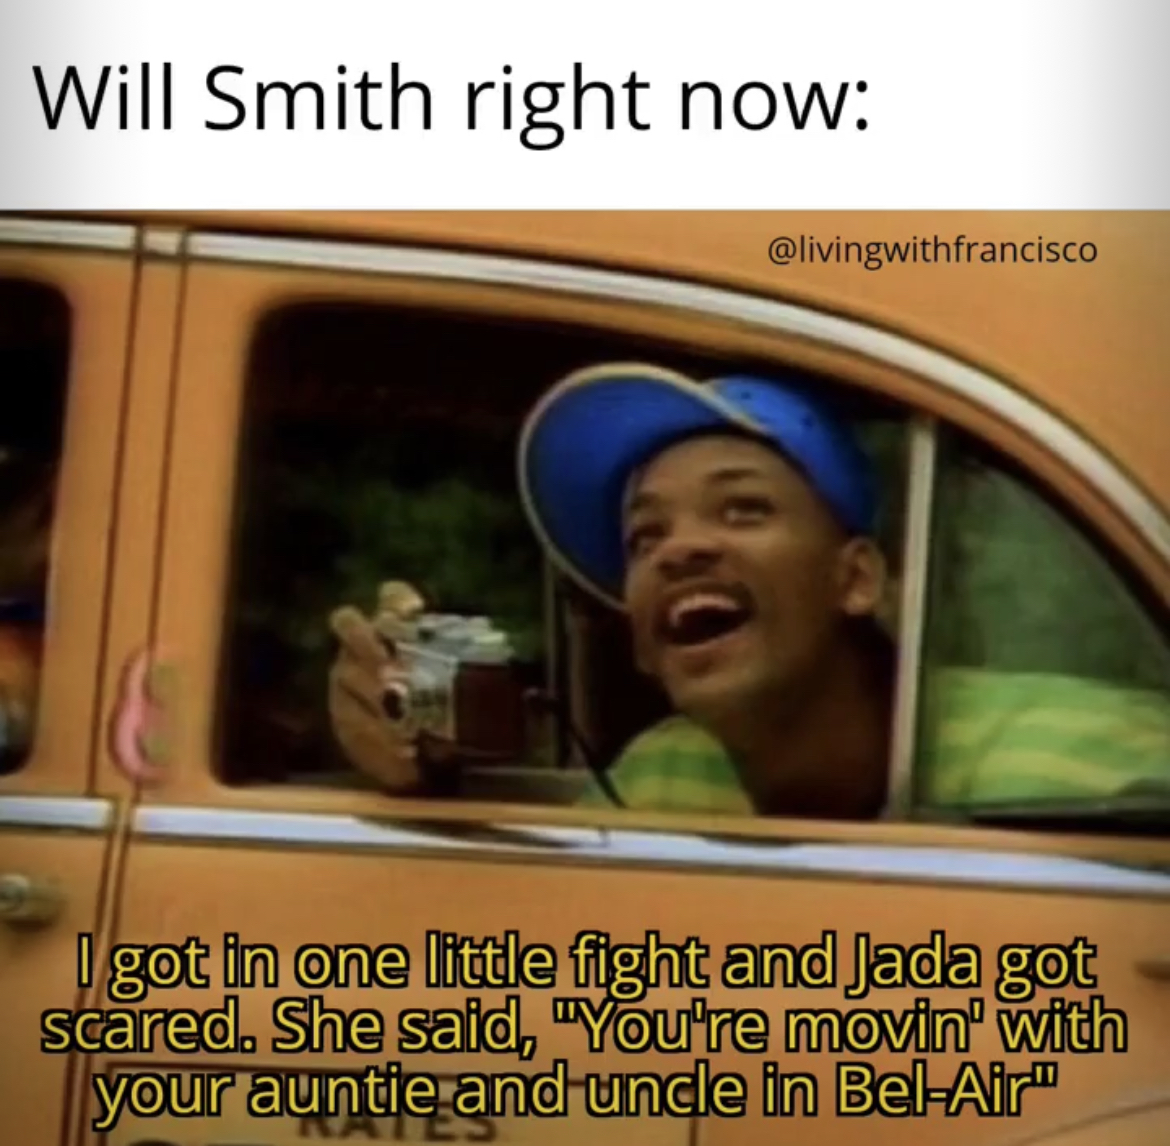 Will Smith Slap memes - fresh prince of bel air meme - Will Smith right now I got in one little fight and Jada got scared. She said,